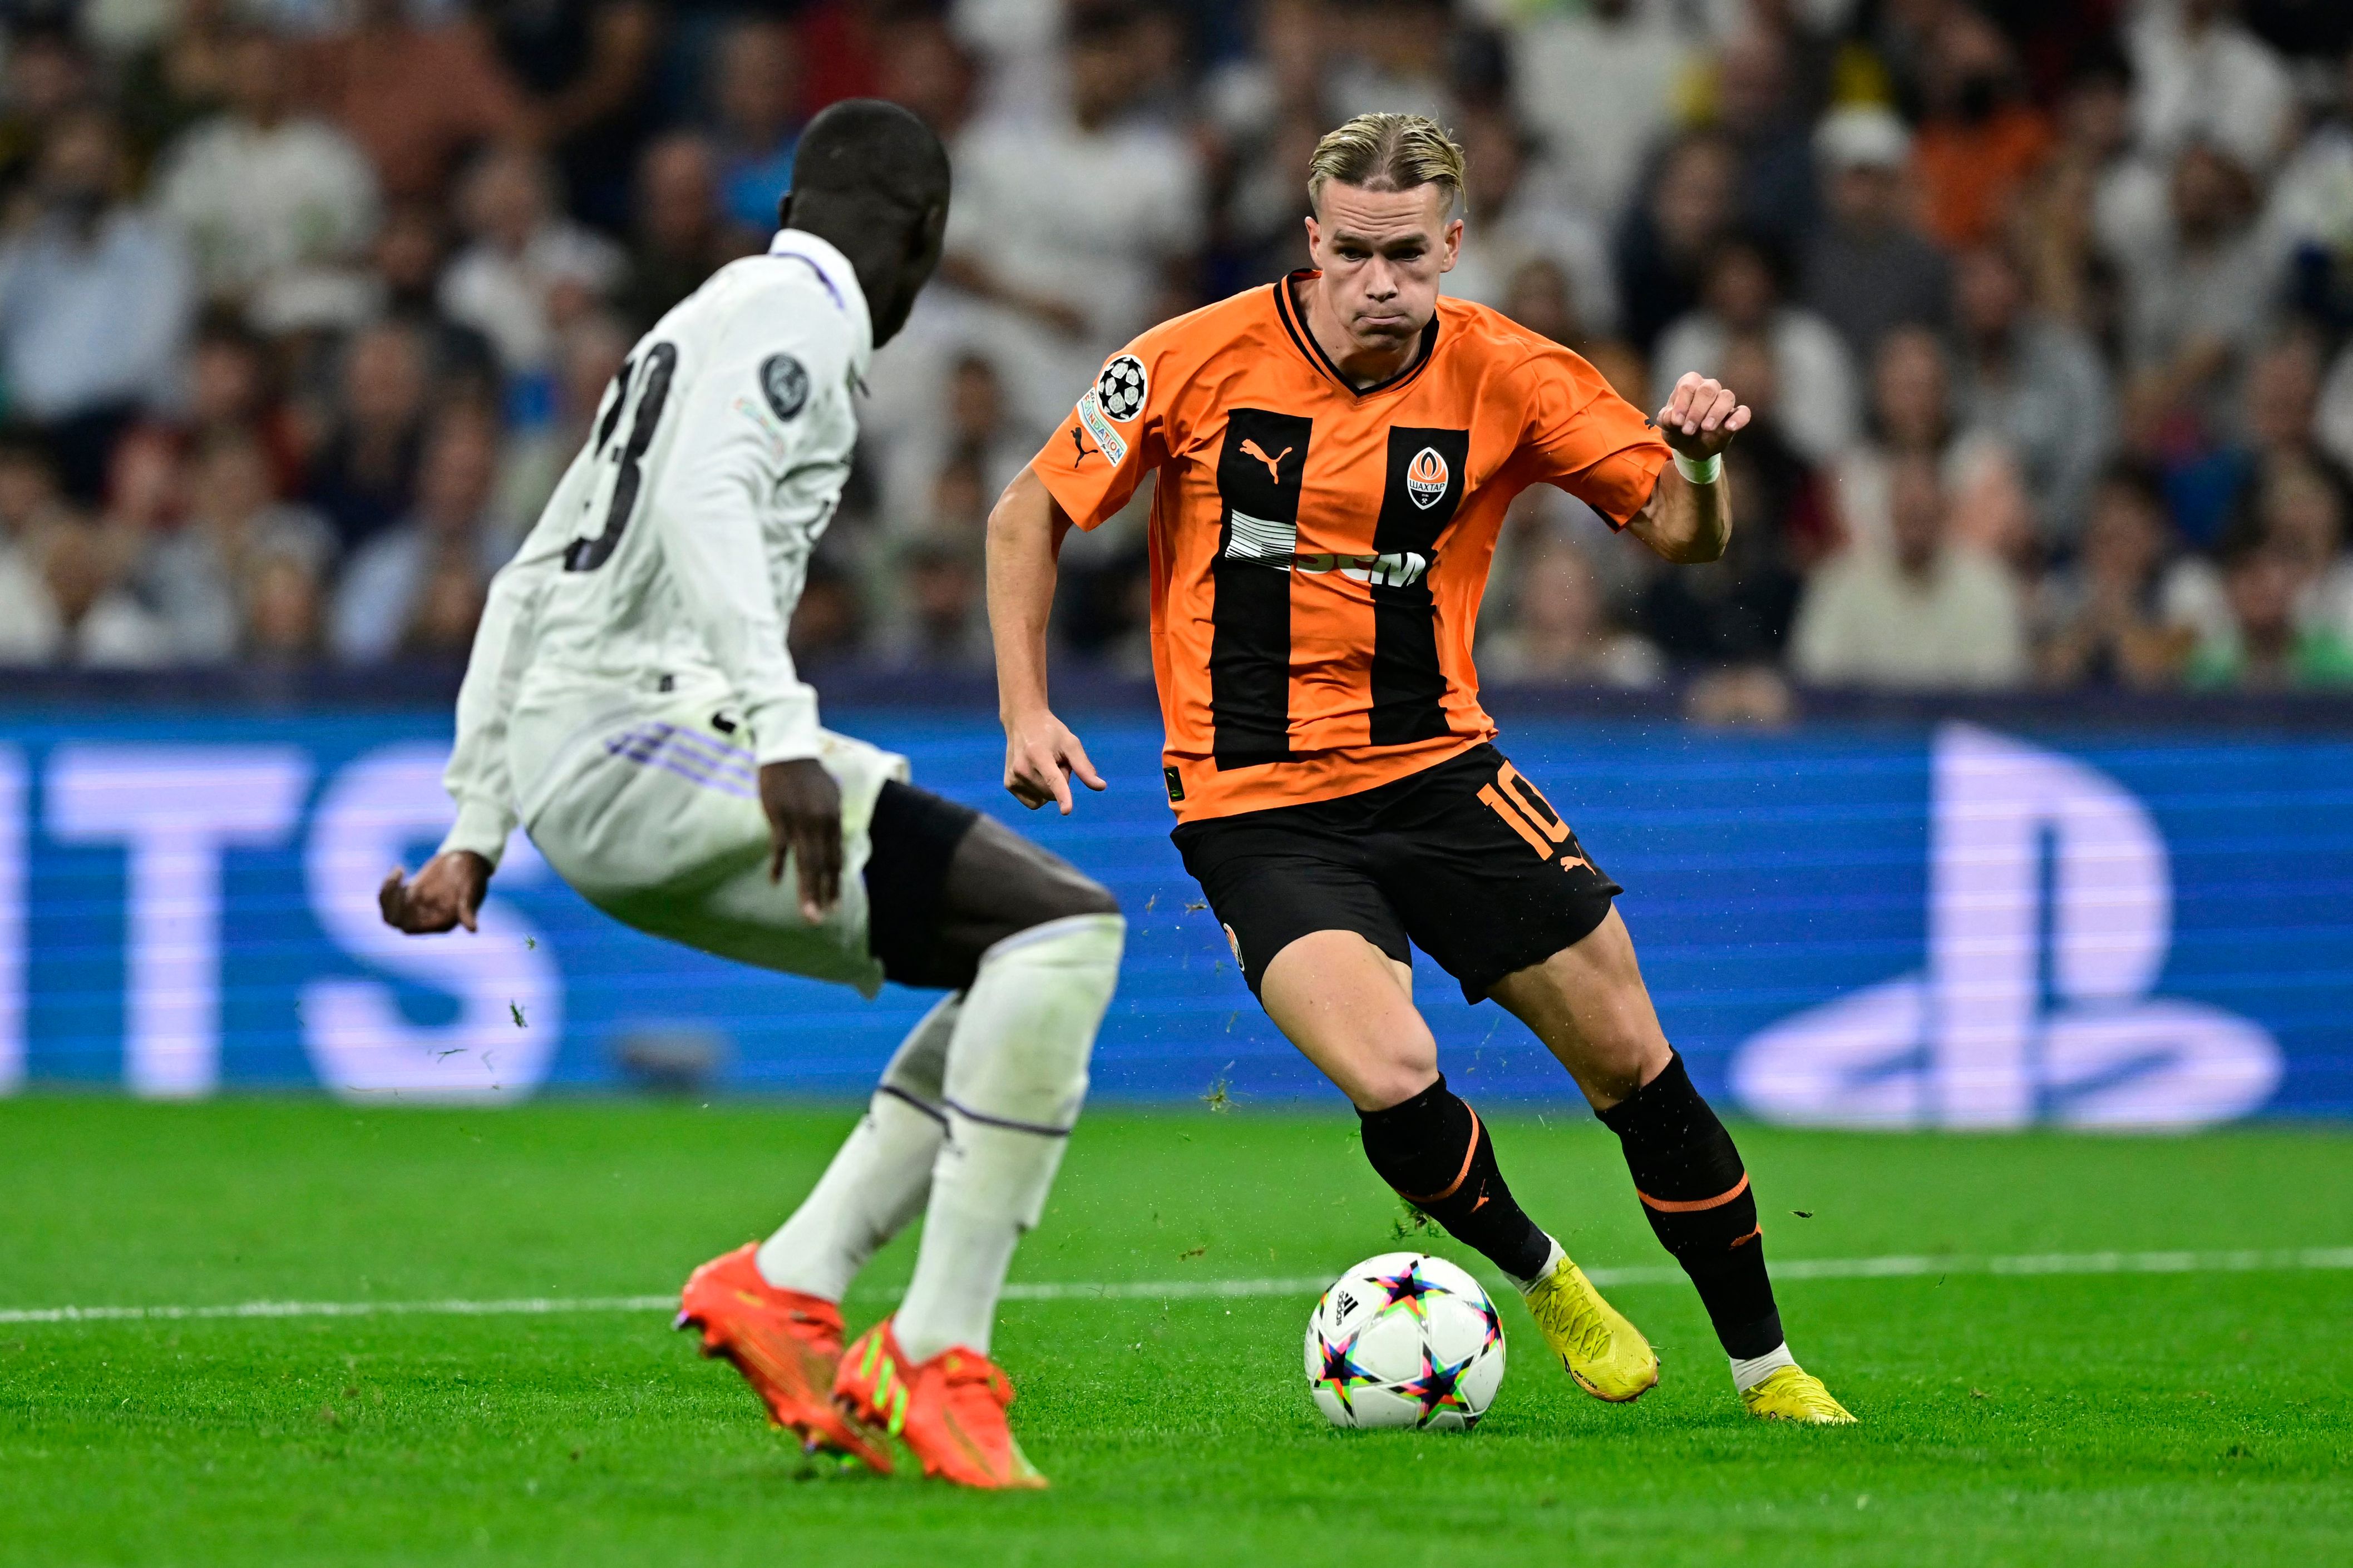 mudryk real madrid shakhtar donetsk | “He doesn’t panic” Henry singles out Arsenal star for praise | The Paradise News